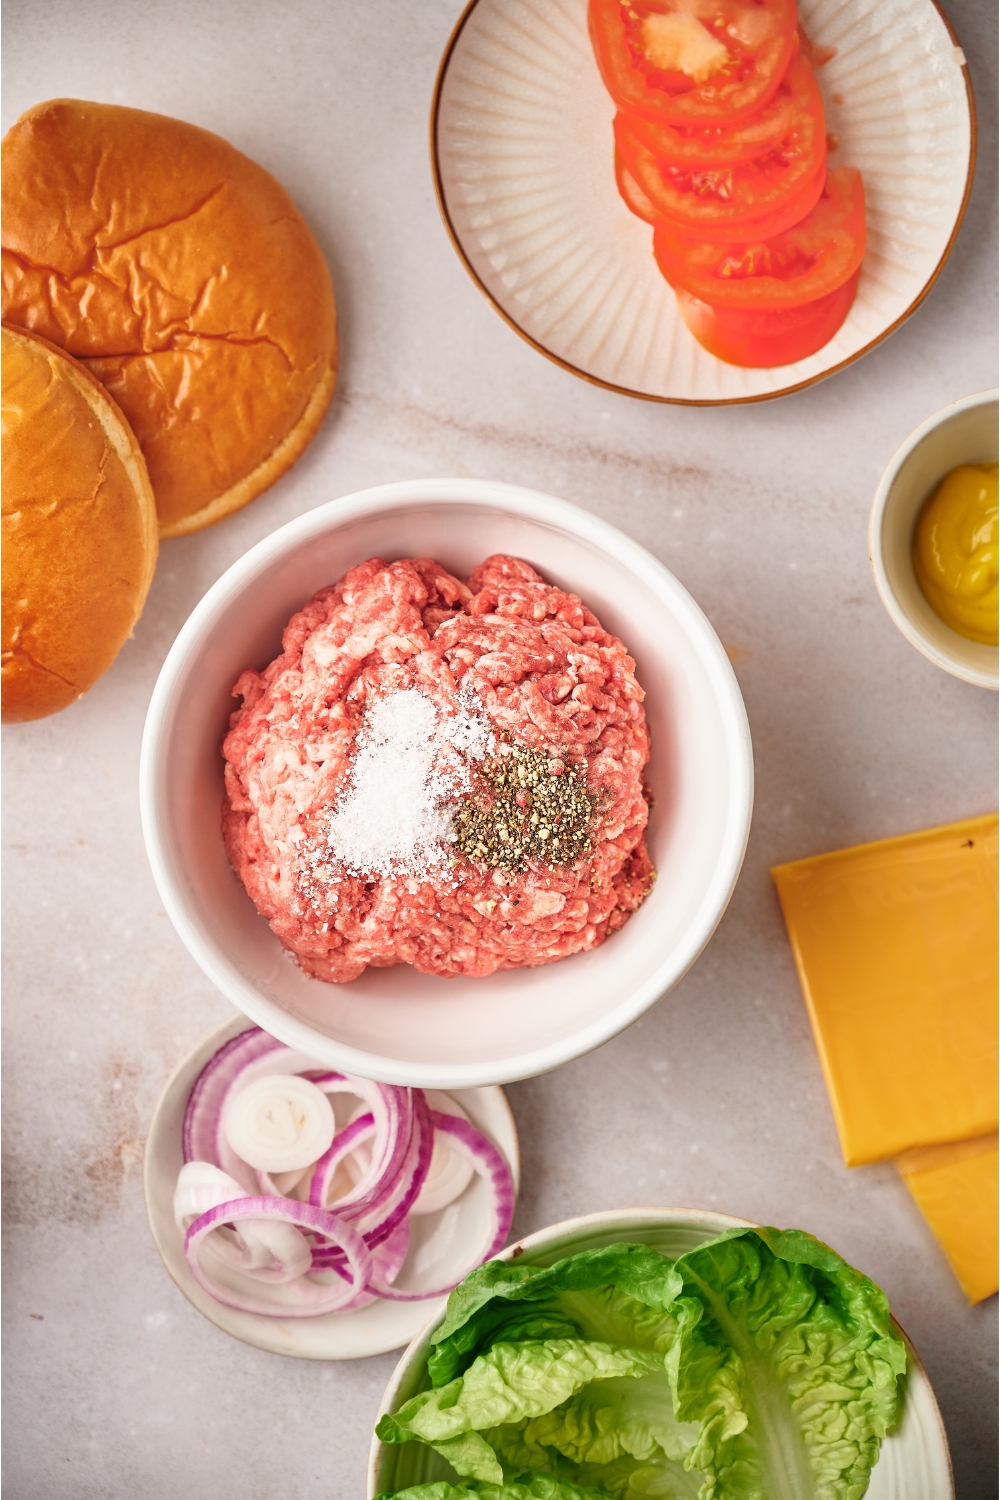 Overhead view of a bowl of raw ground beef with salt and pepper sprinkled on top. The bowl of beef is surrounded by ingredients for making cheeseburgers.